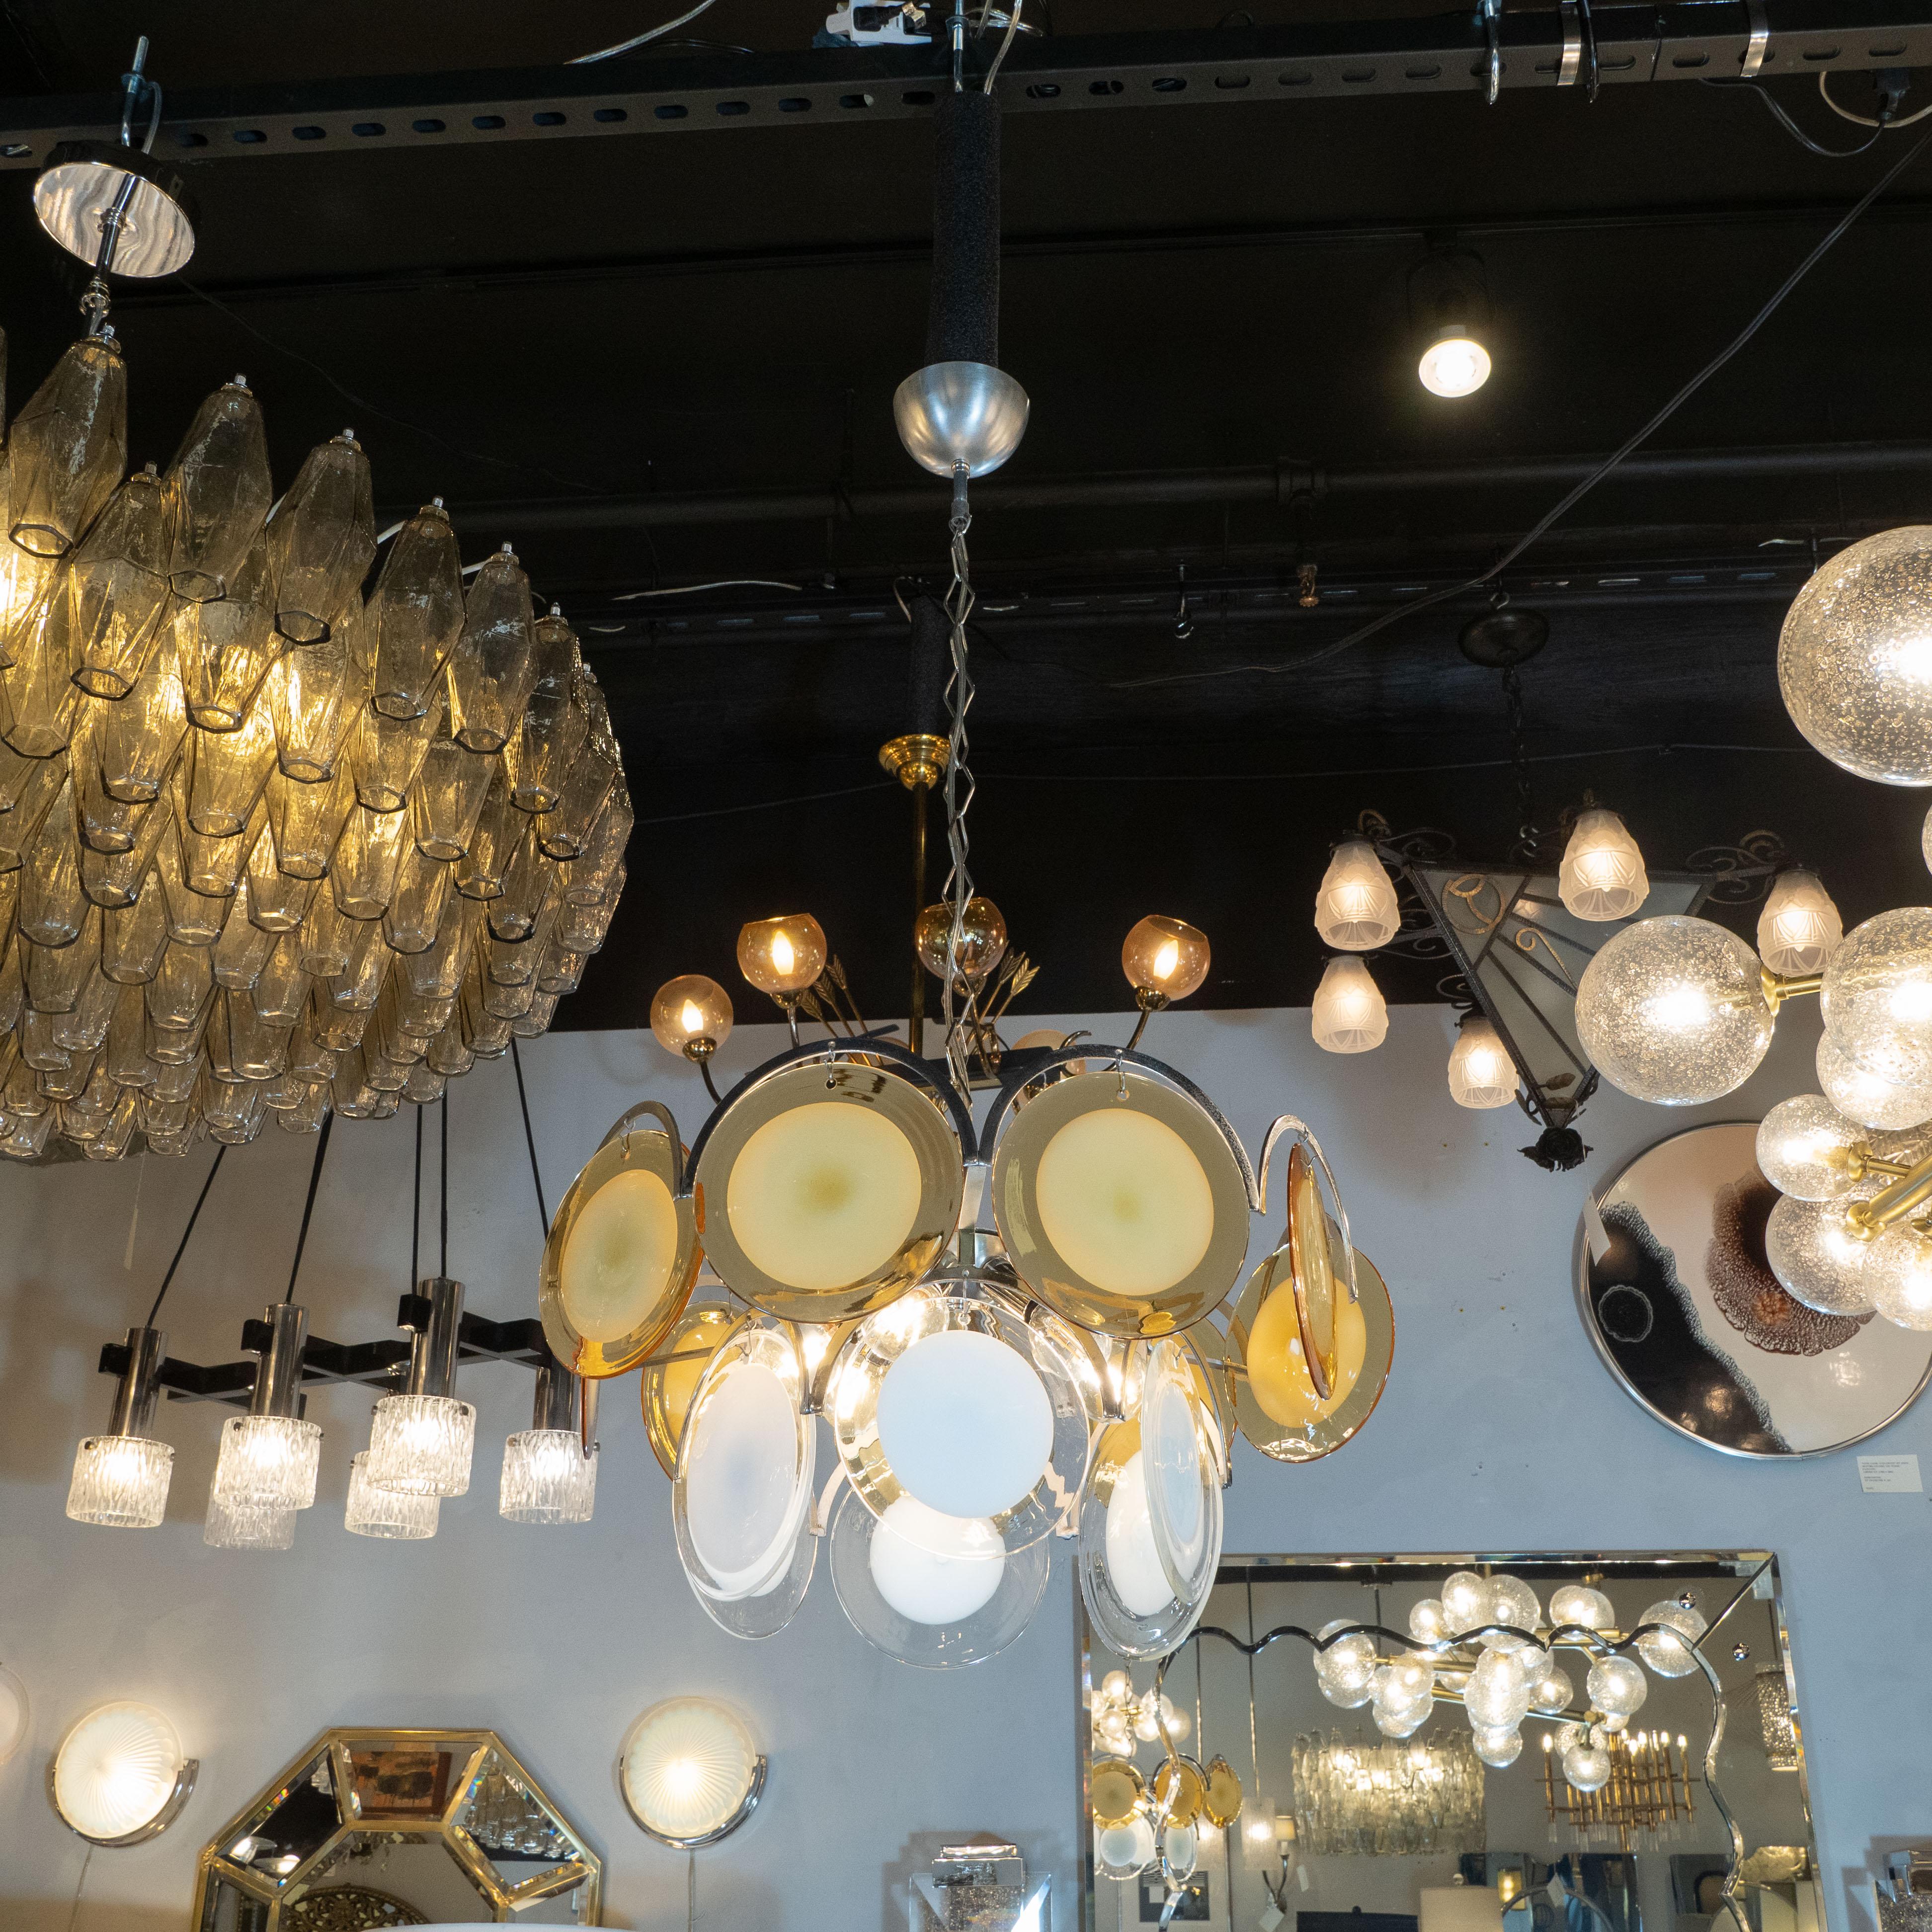 This sophisticated Mid-Century Modern chandelier attributed to Vistosi, and hand blown in Murano, Italy circa 1970. It features two tiers of glass discs, suspended from a handcrafted aluminum frame that includes demilune embellishments that trace